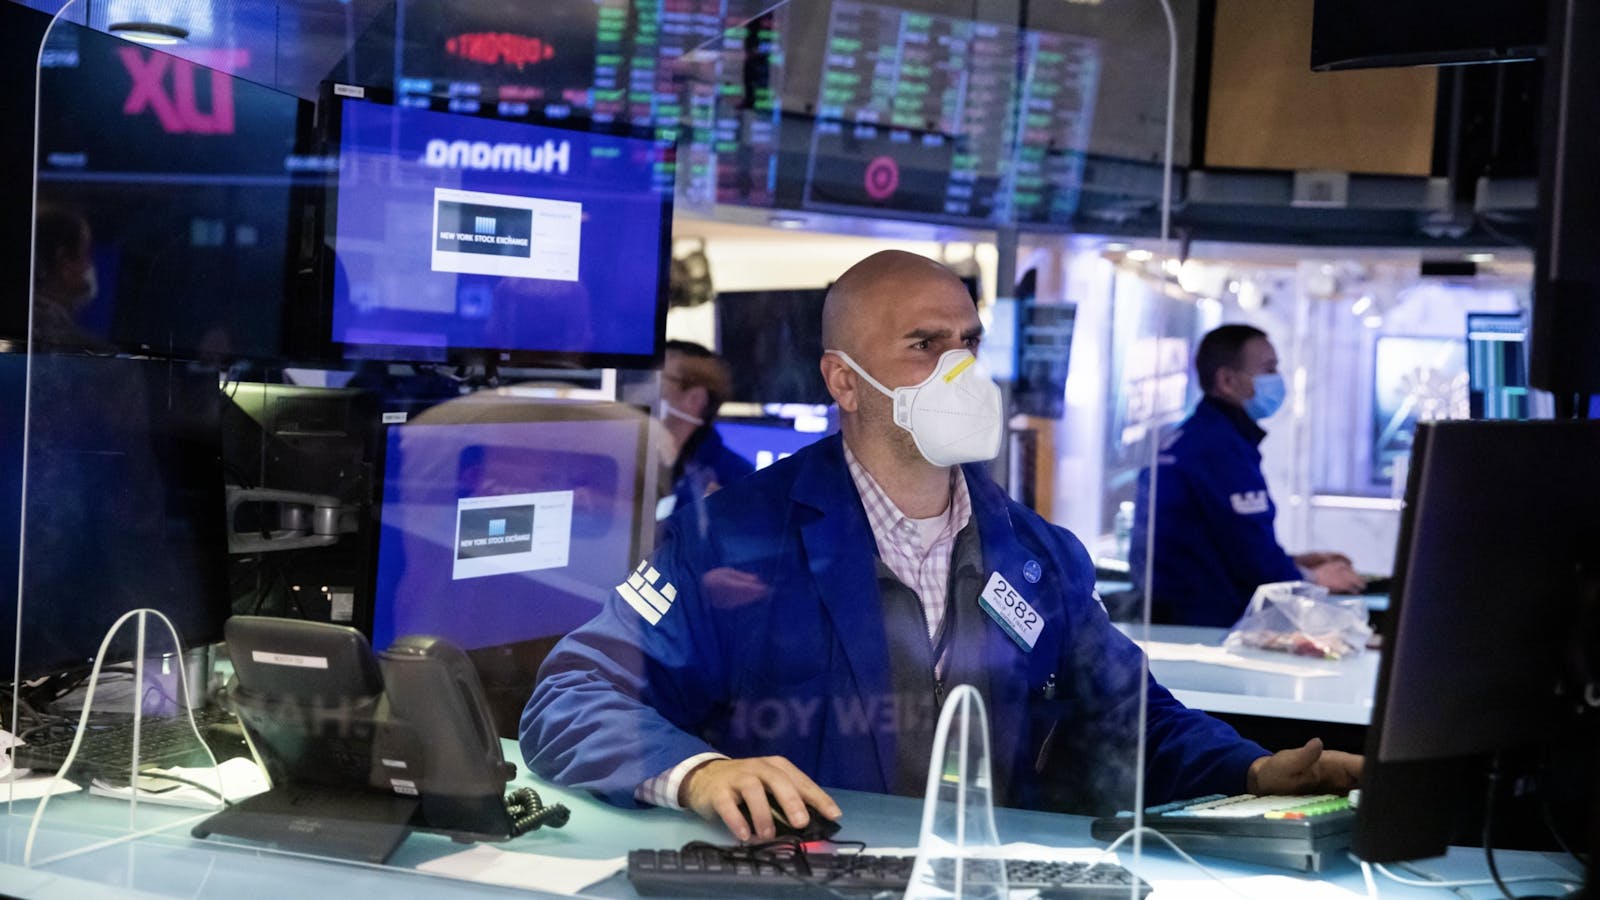 A trader on the floor of the New York Stock Exchange. Photo by Bloomberg